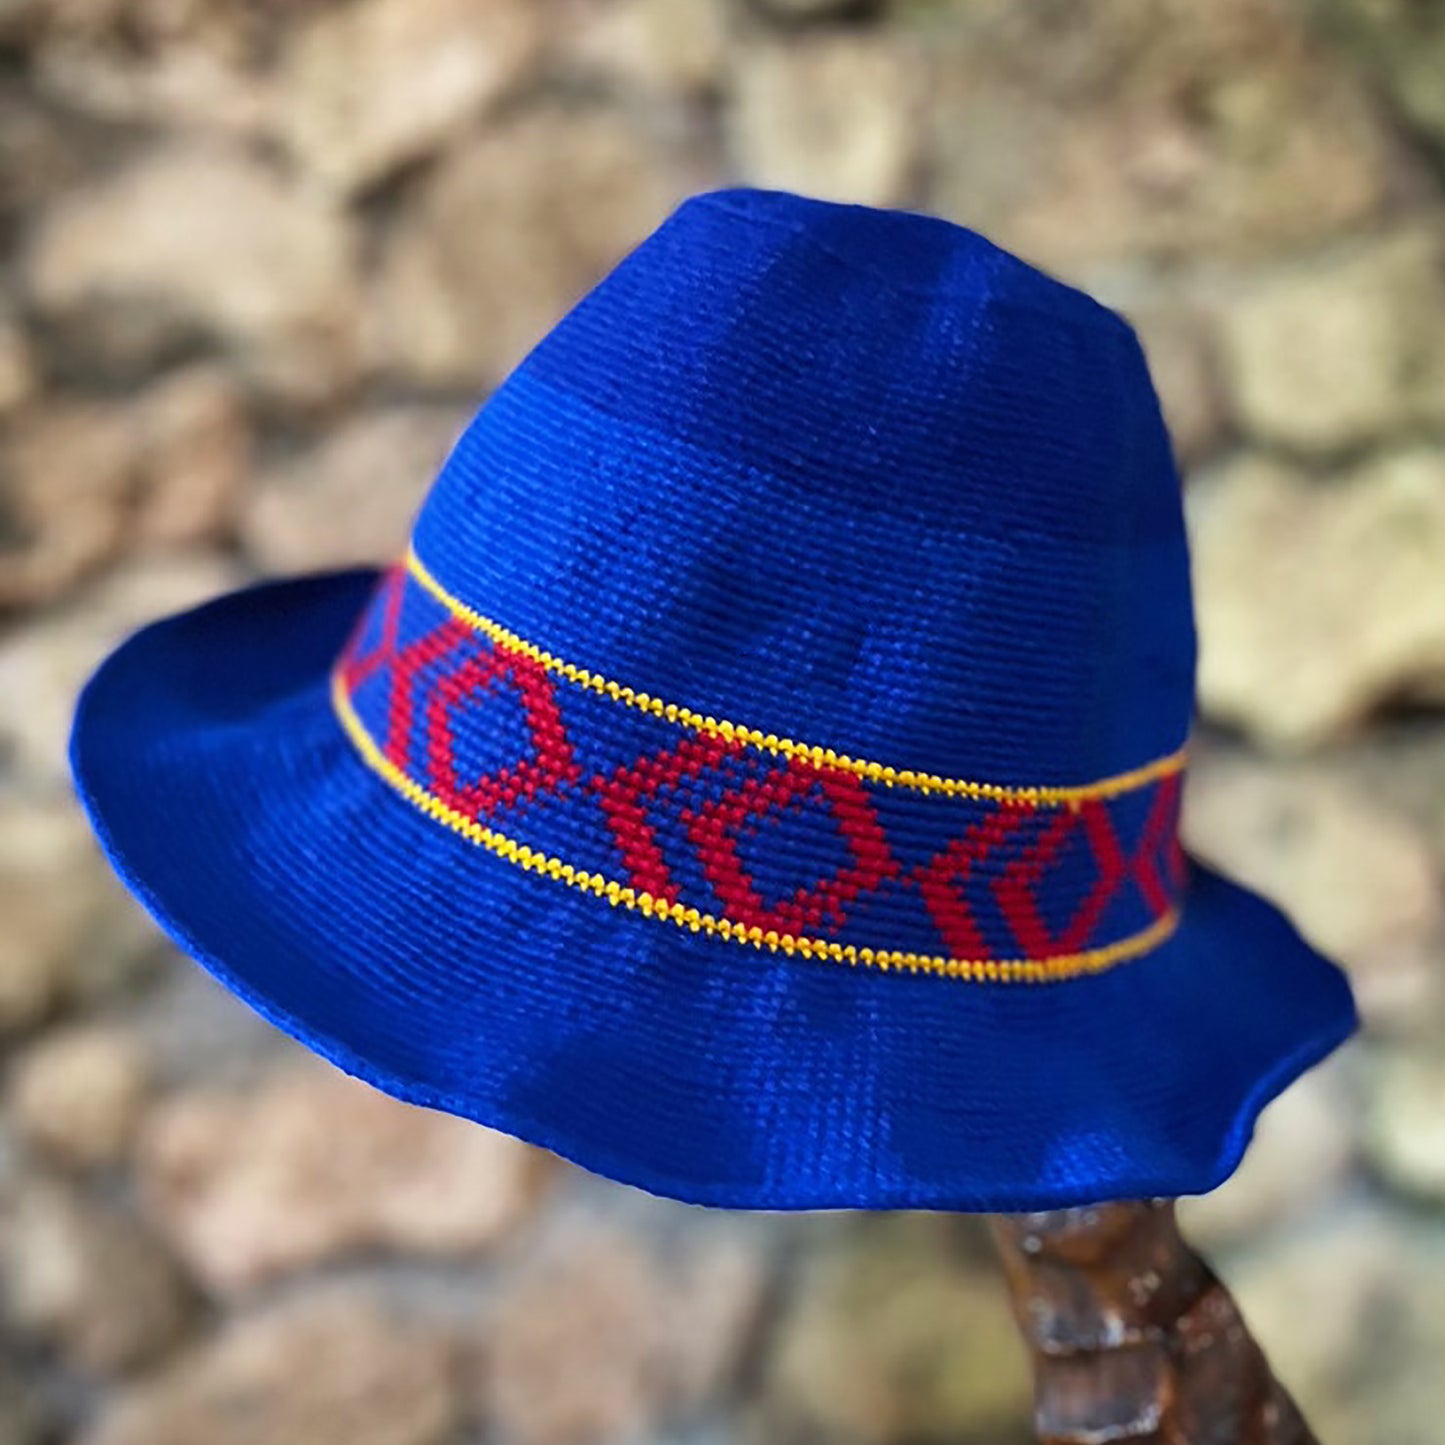 Konso Crochet Hat -  Blue With Red, Yellow DRAFT